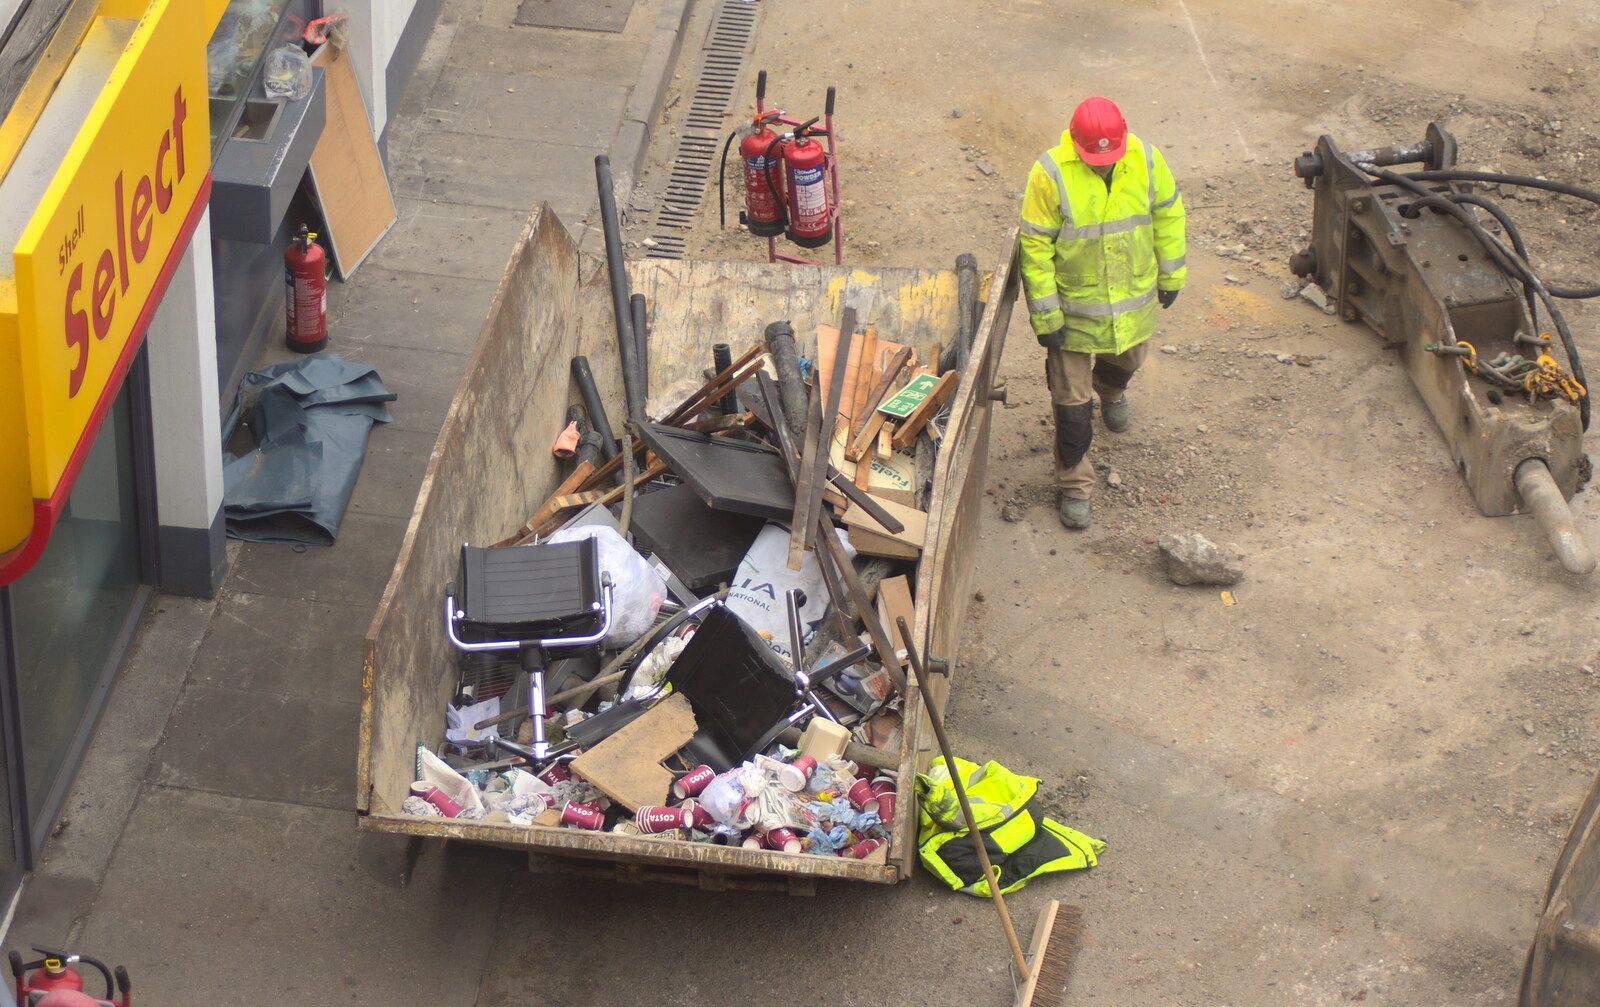 A skip is filled up with stuff out of the shop from Tangmere at Norwich Station, Norwich, Norfolk - 25th May 2013